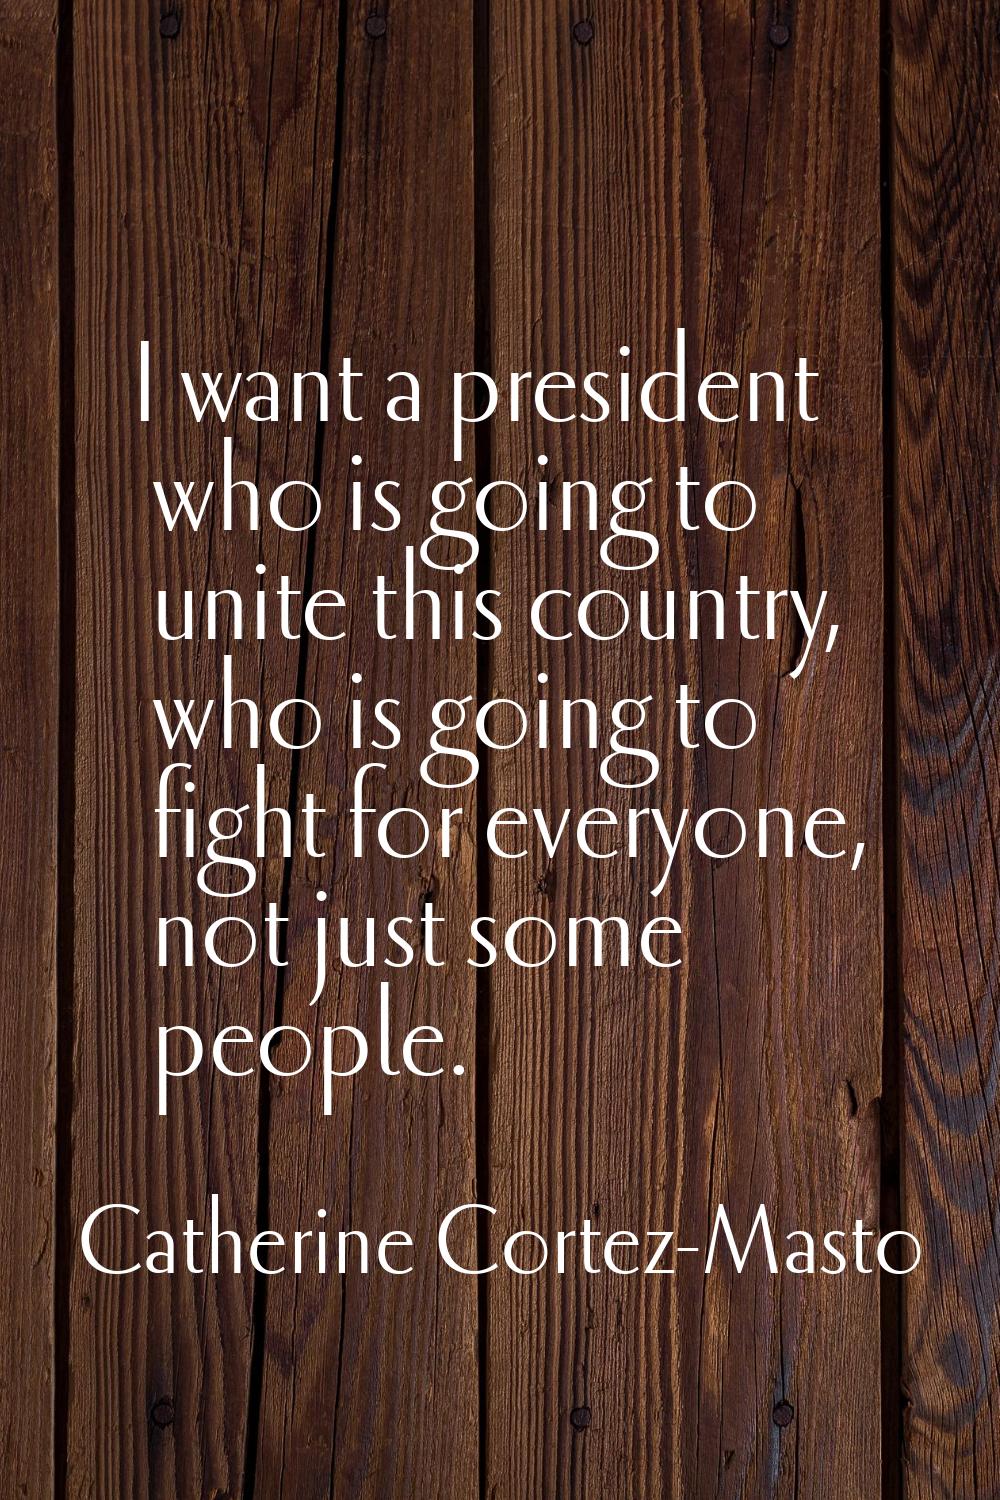 I want a president who is going to unite this country, who is going to fight for everyone, not just